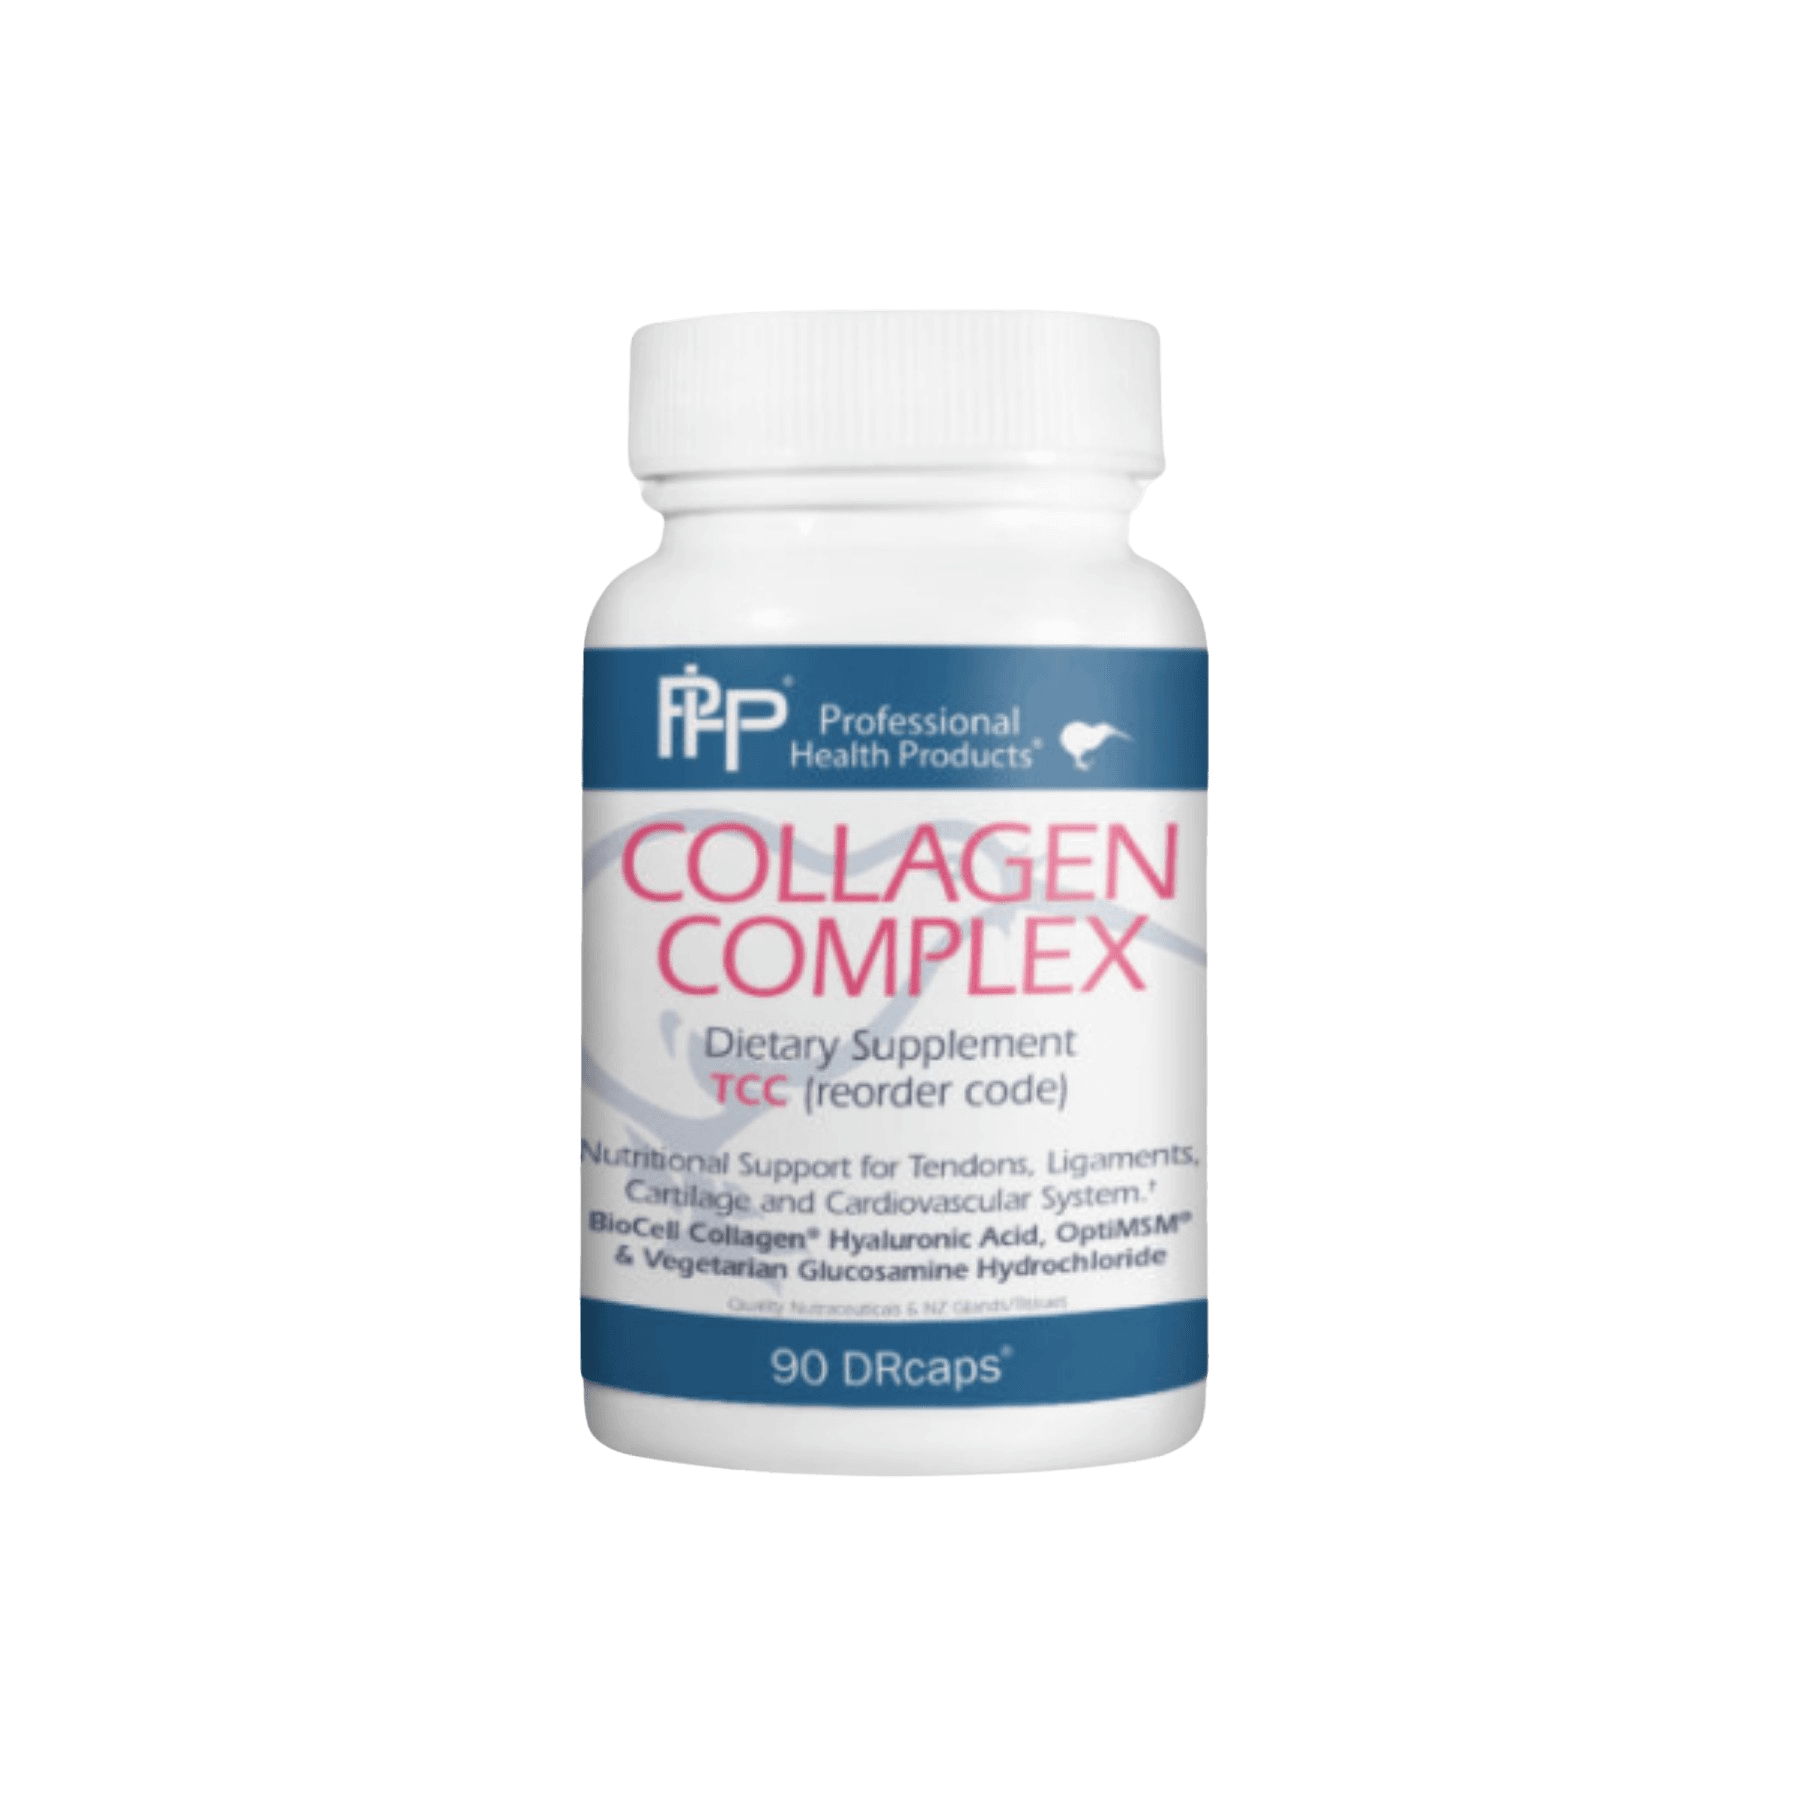 Image of Professional Health Products Collagen Complex Bottle